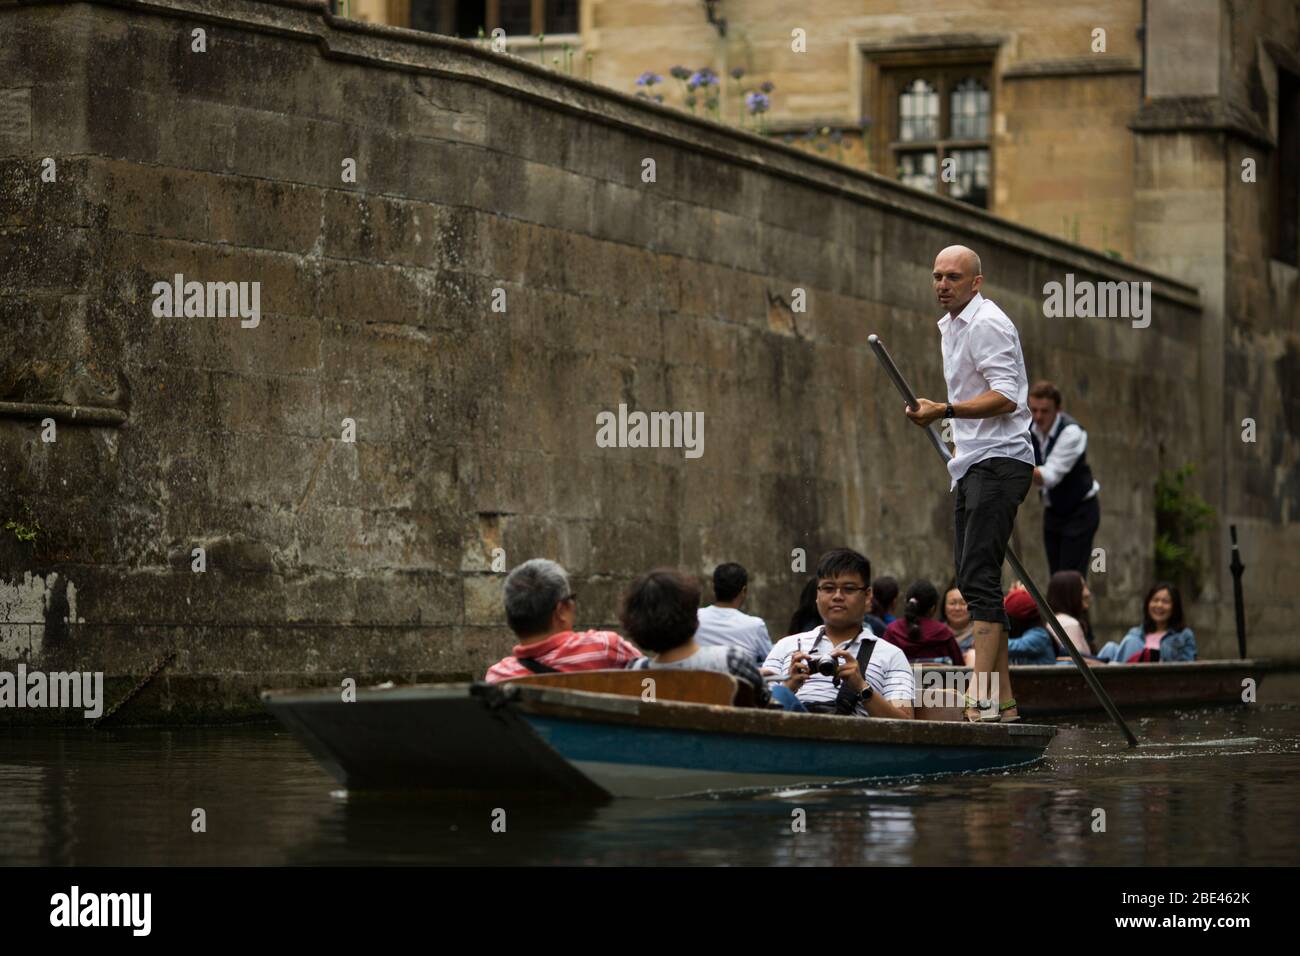 Punters lead tour groups on their punts down the river Cam in Cambridge, England, United Kingdom, past historic college buildings. Stock Photo